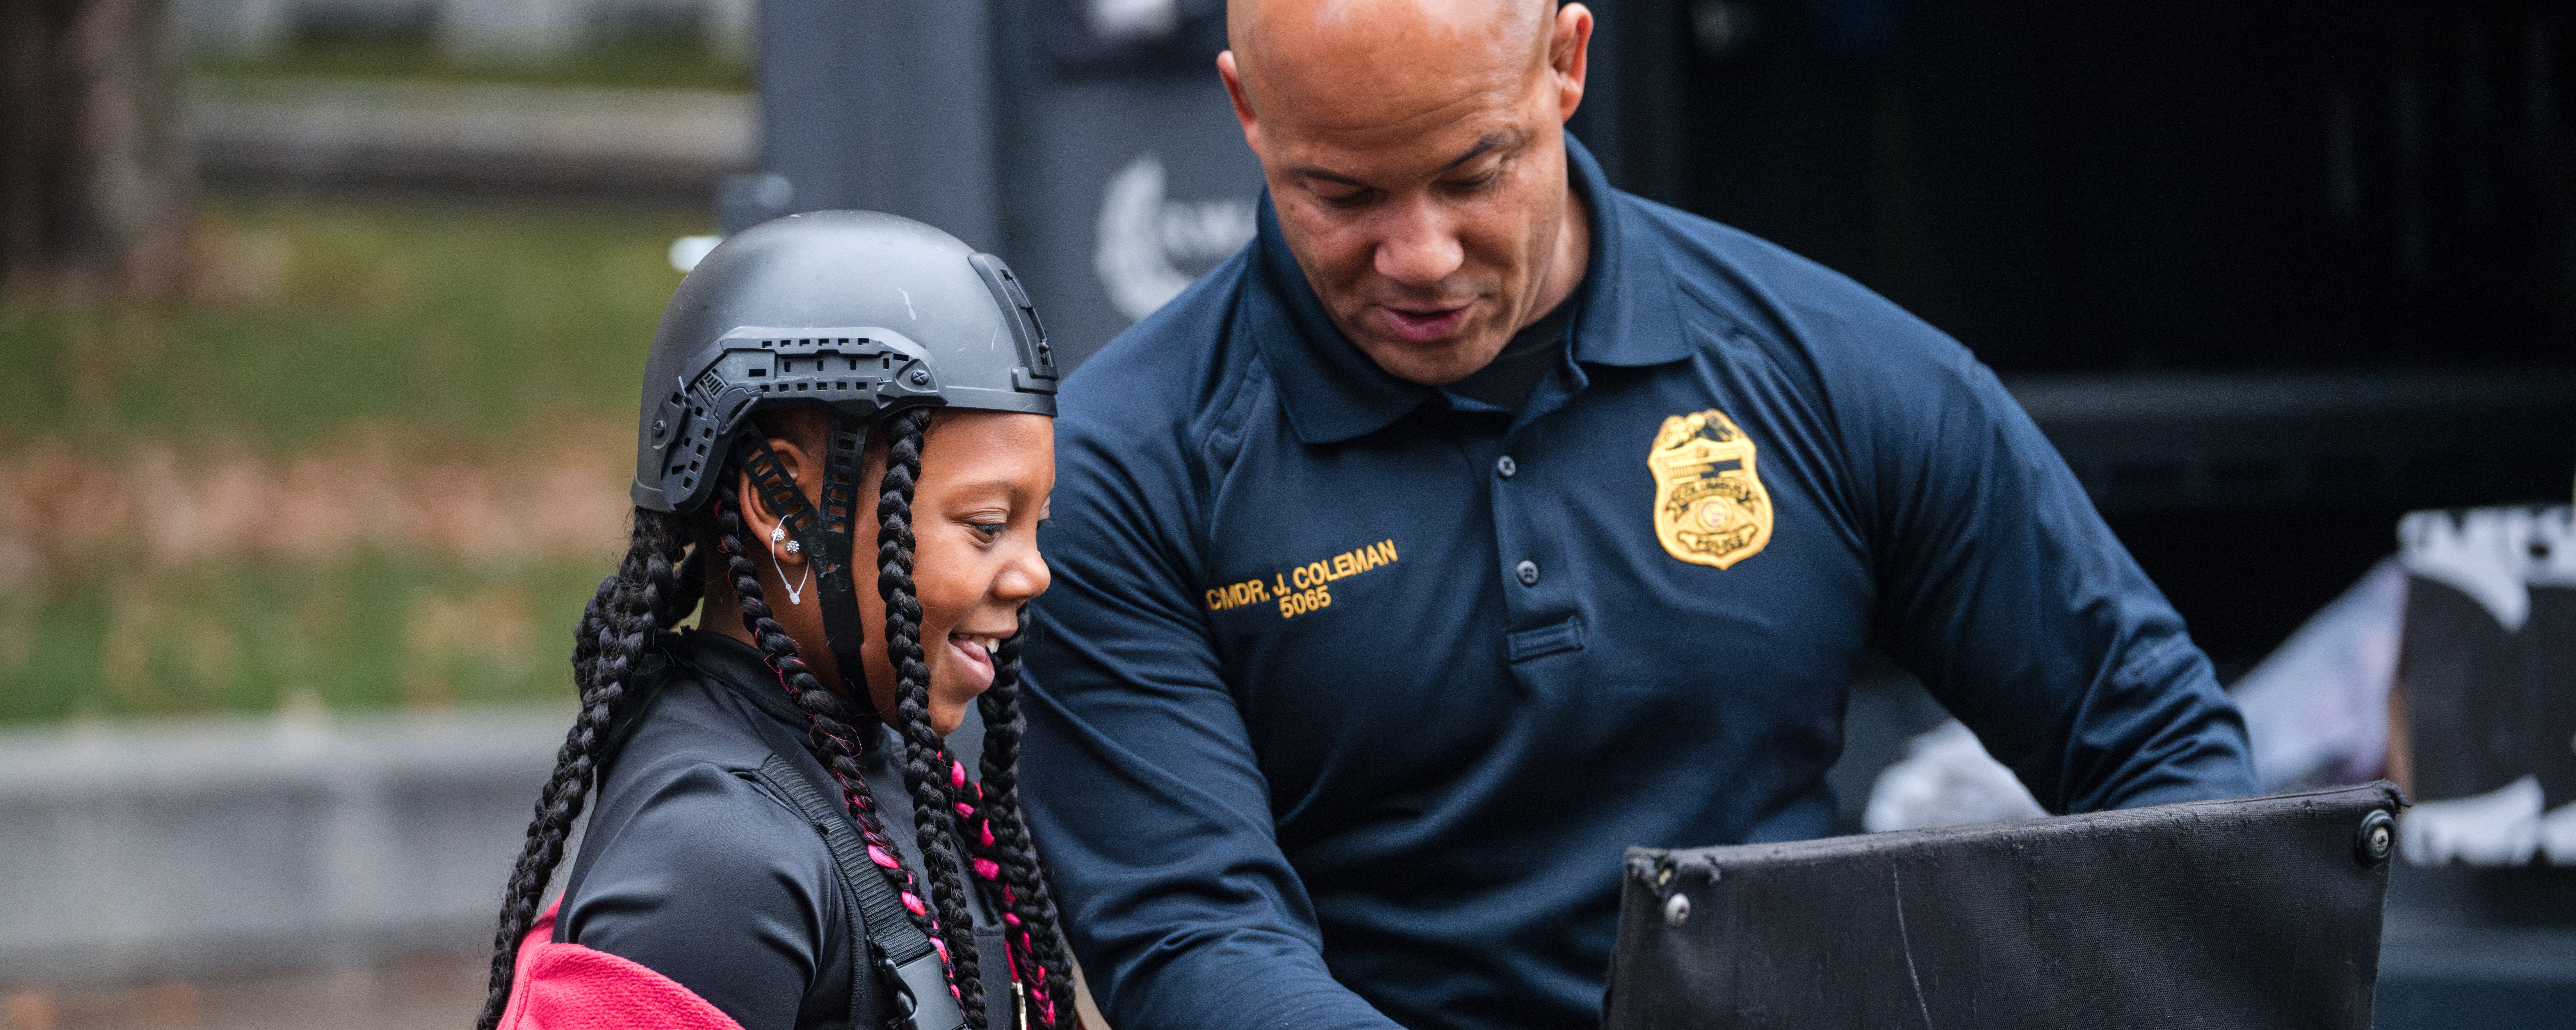 Columbus Police Trunk or Treat Community Event